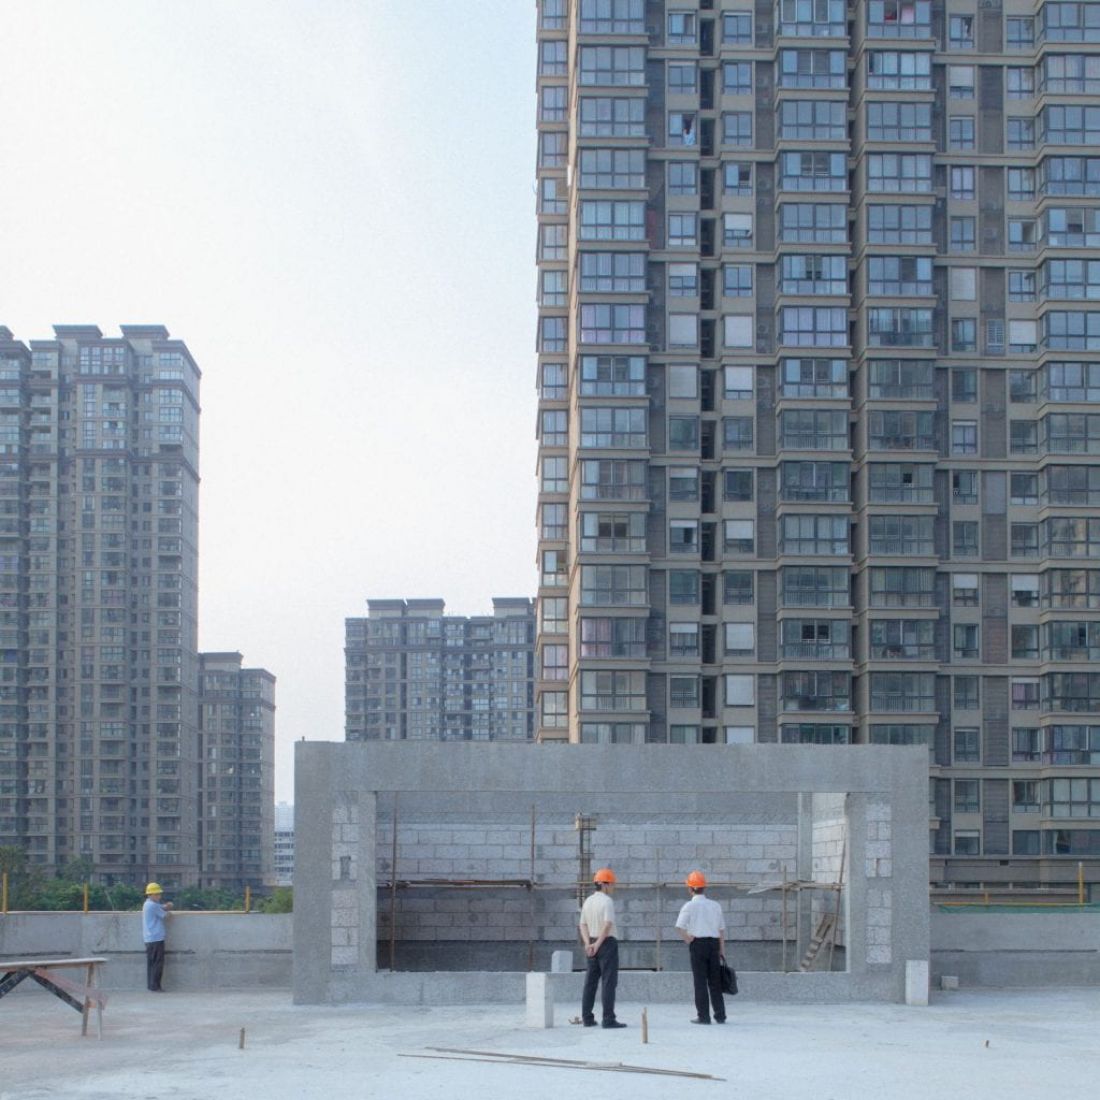 Still from Under the Sun, director Qiu Yang, 2014. Image supplied.